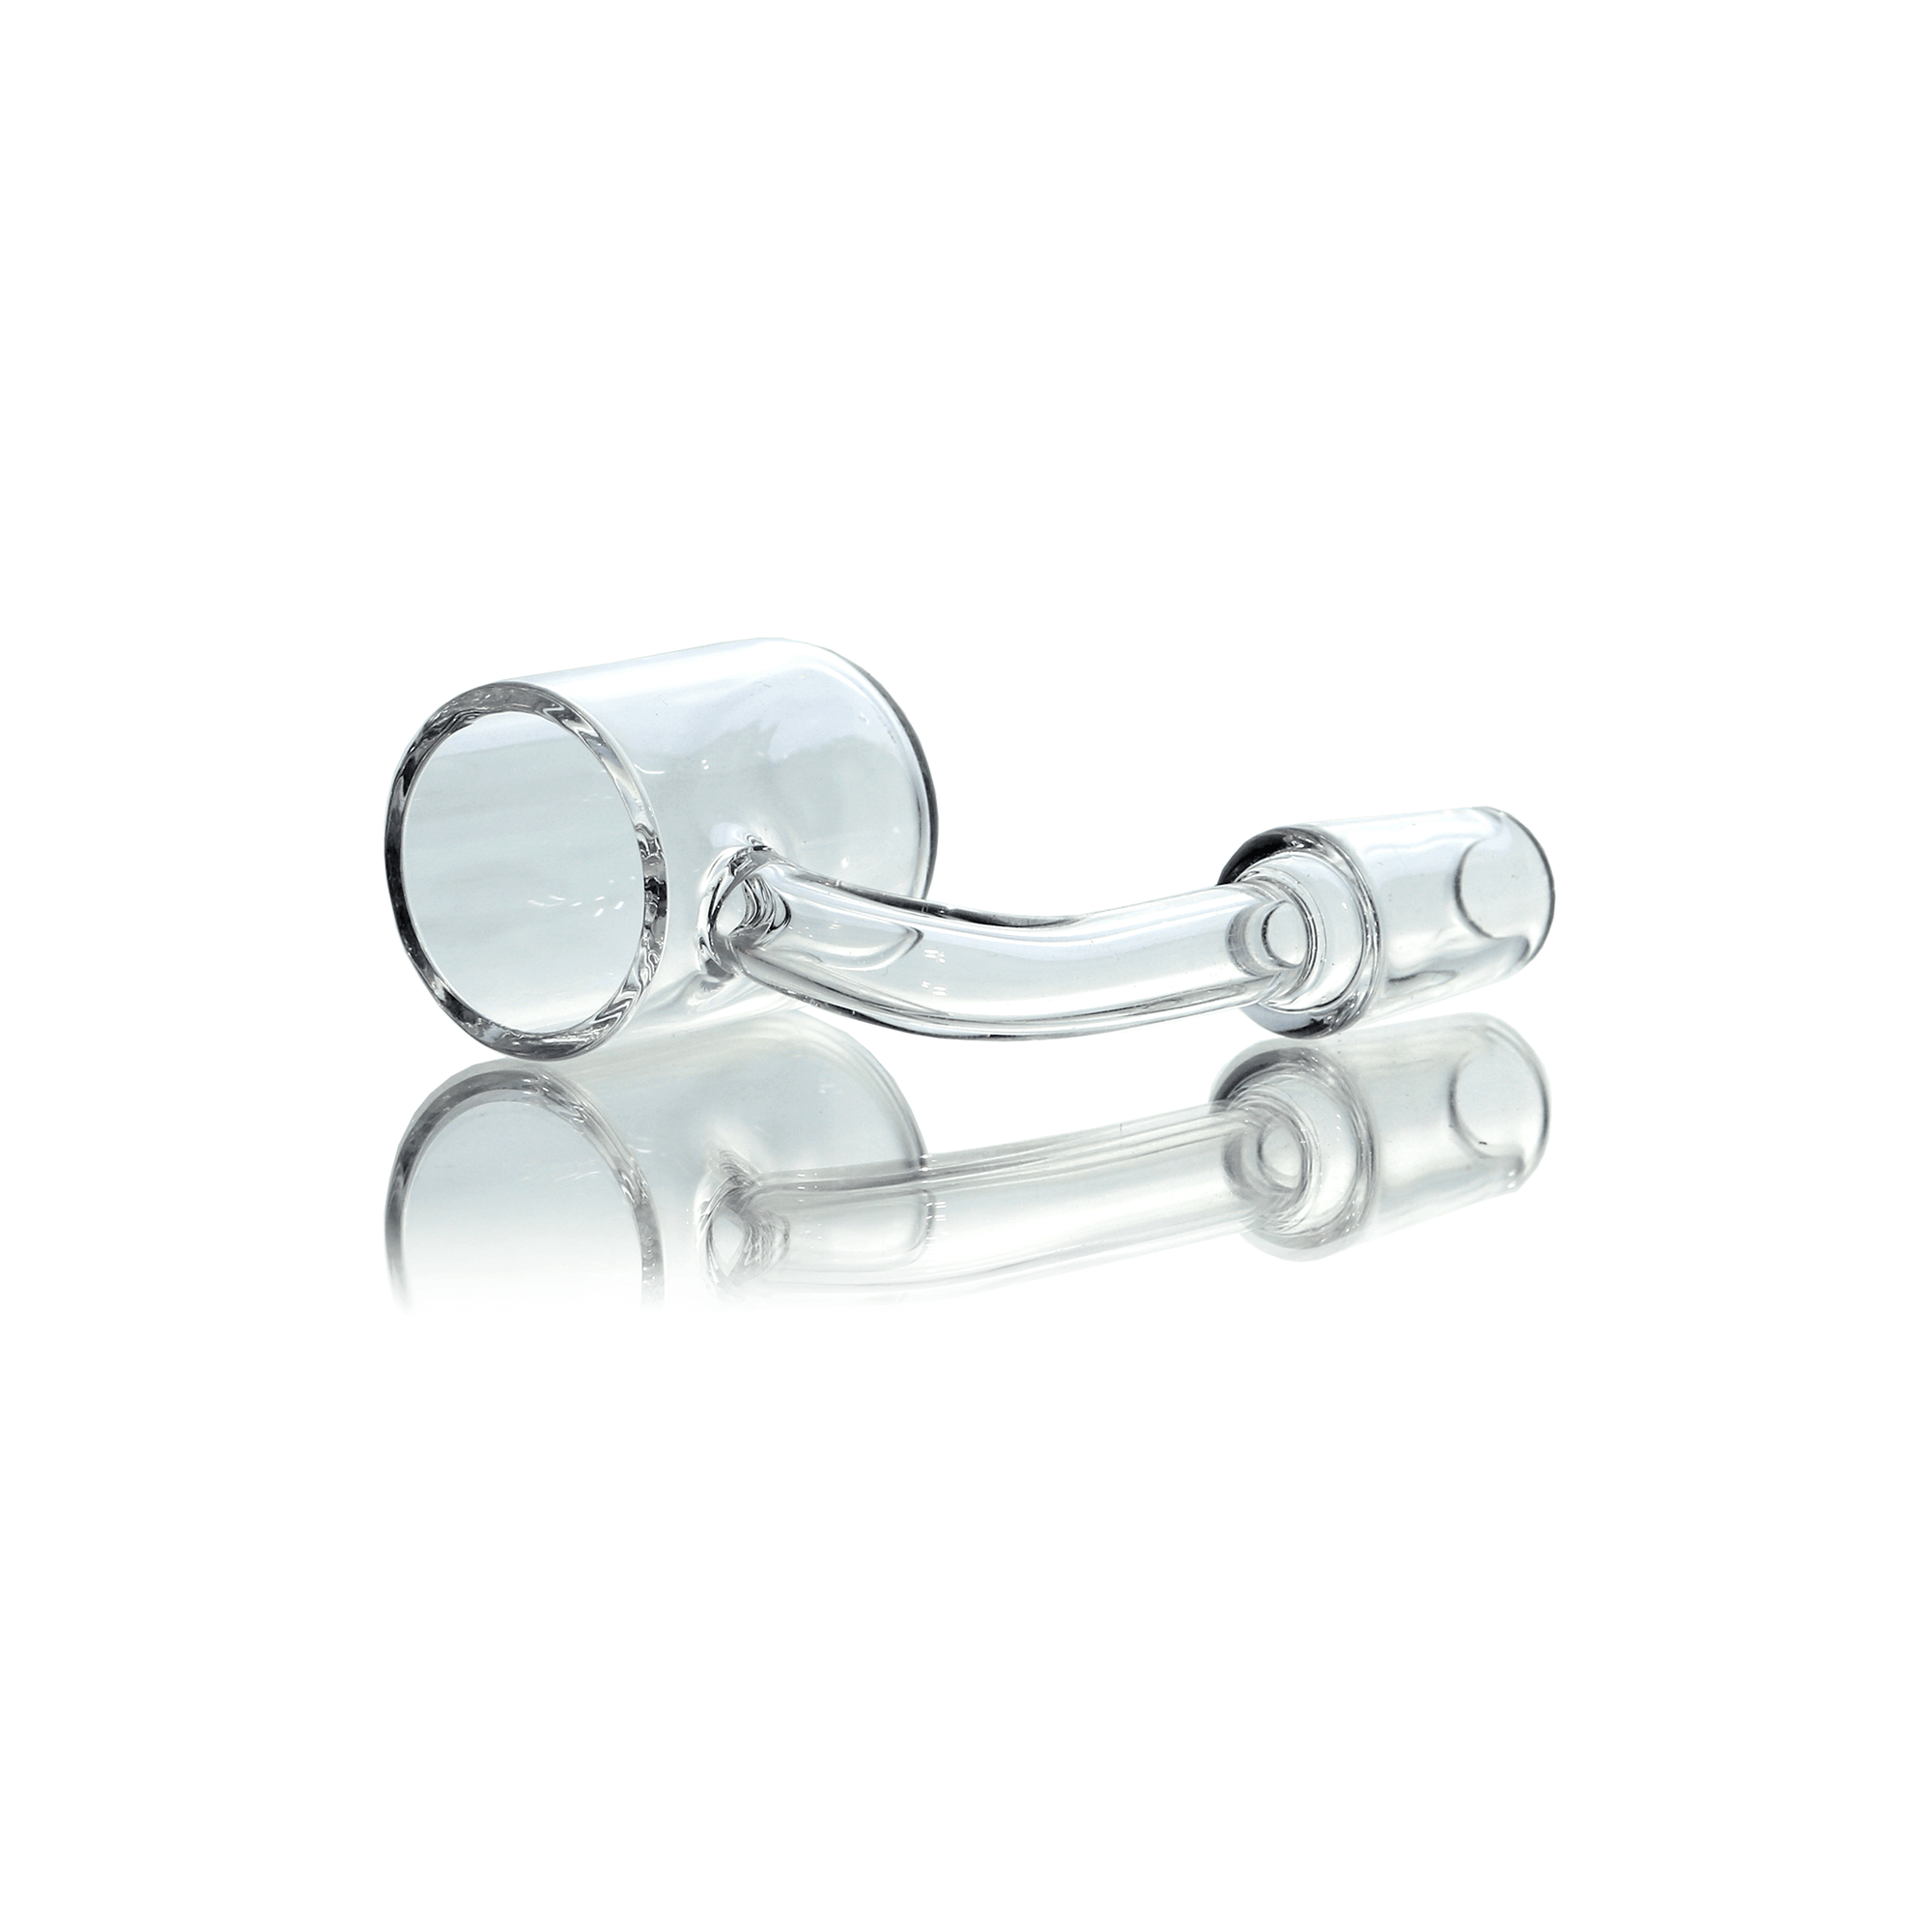 25mm Flat Top Quartz Banger | Rounded Bottom | Insert Cup | Angled Prone View | DW